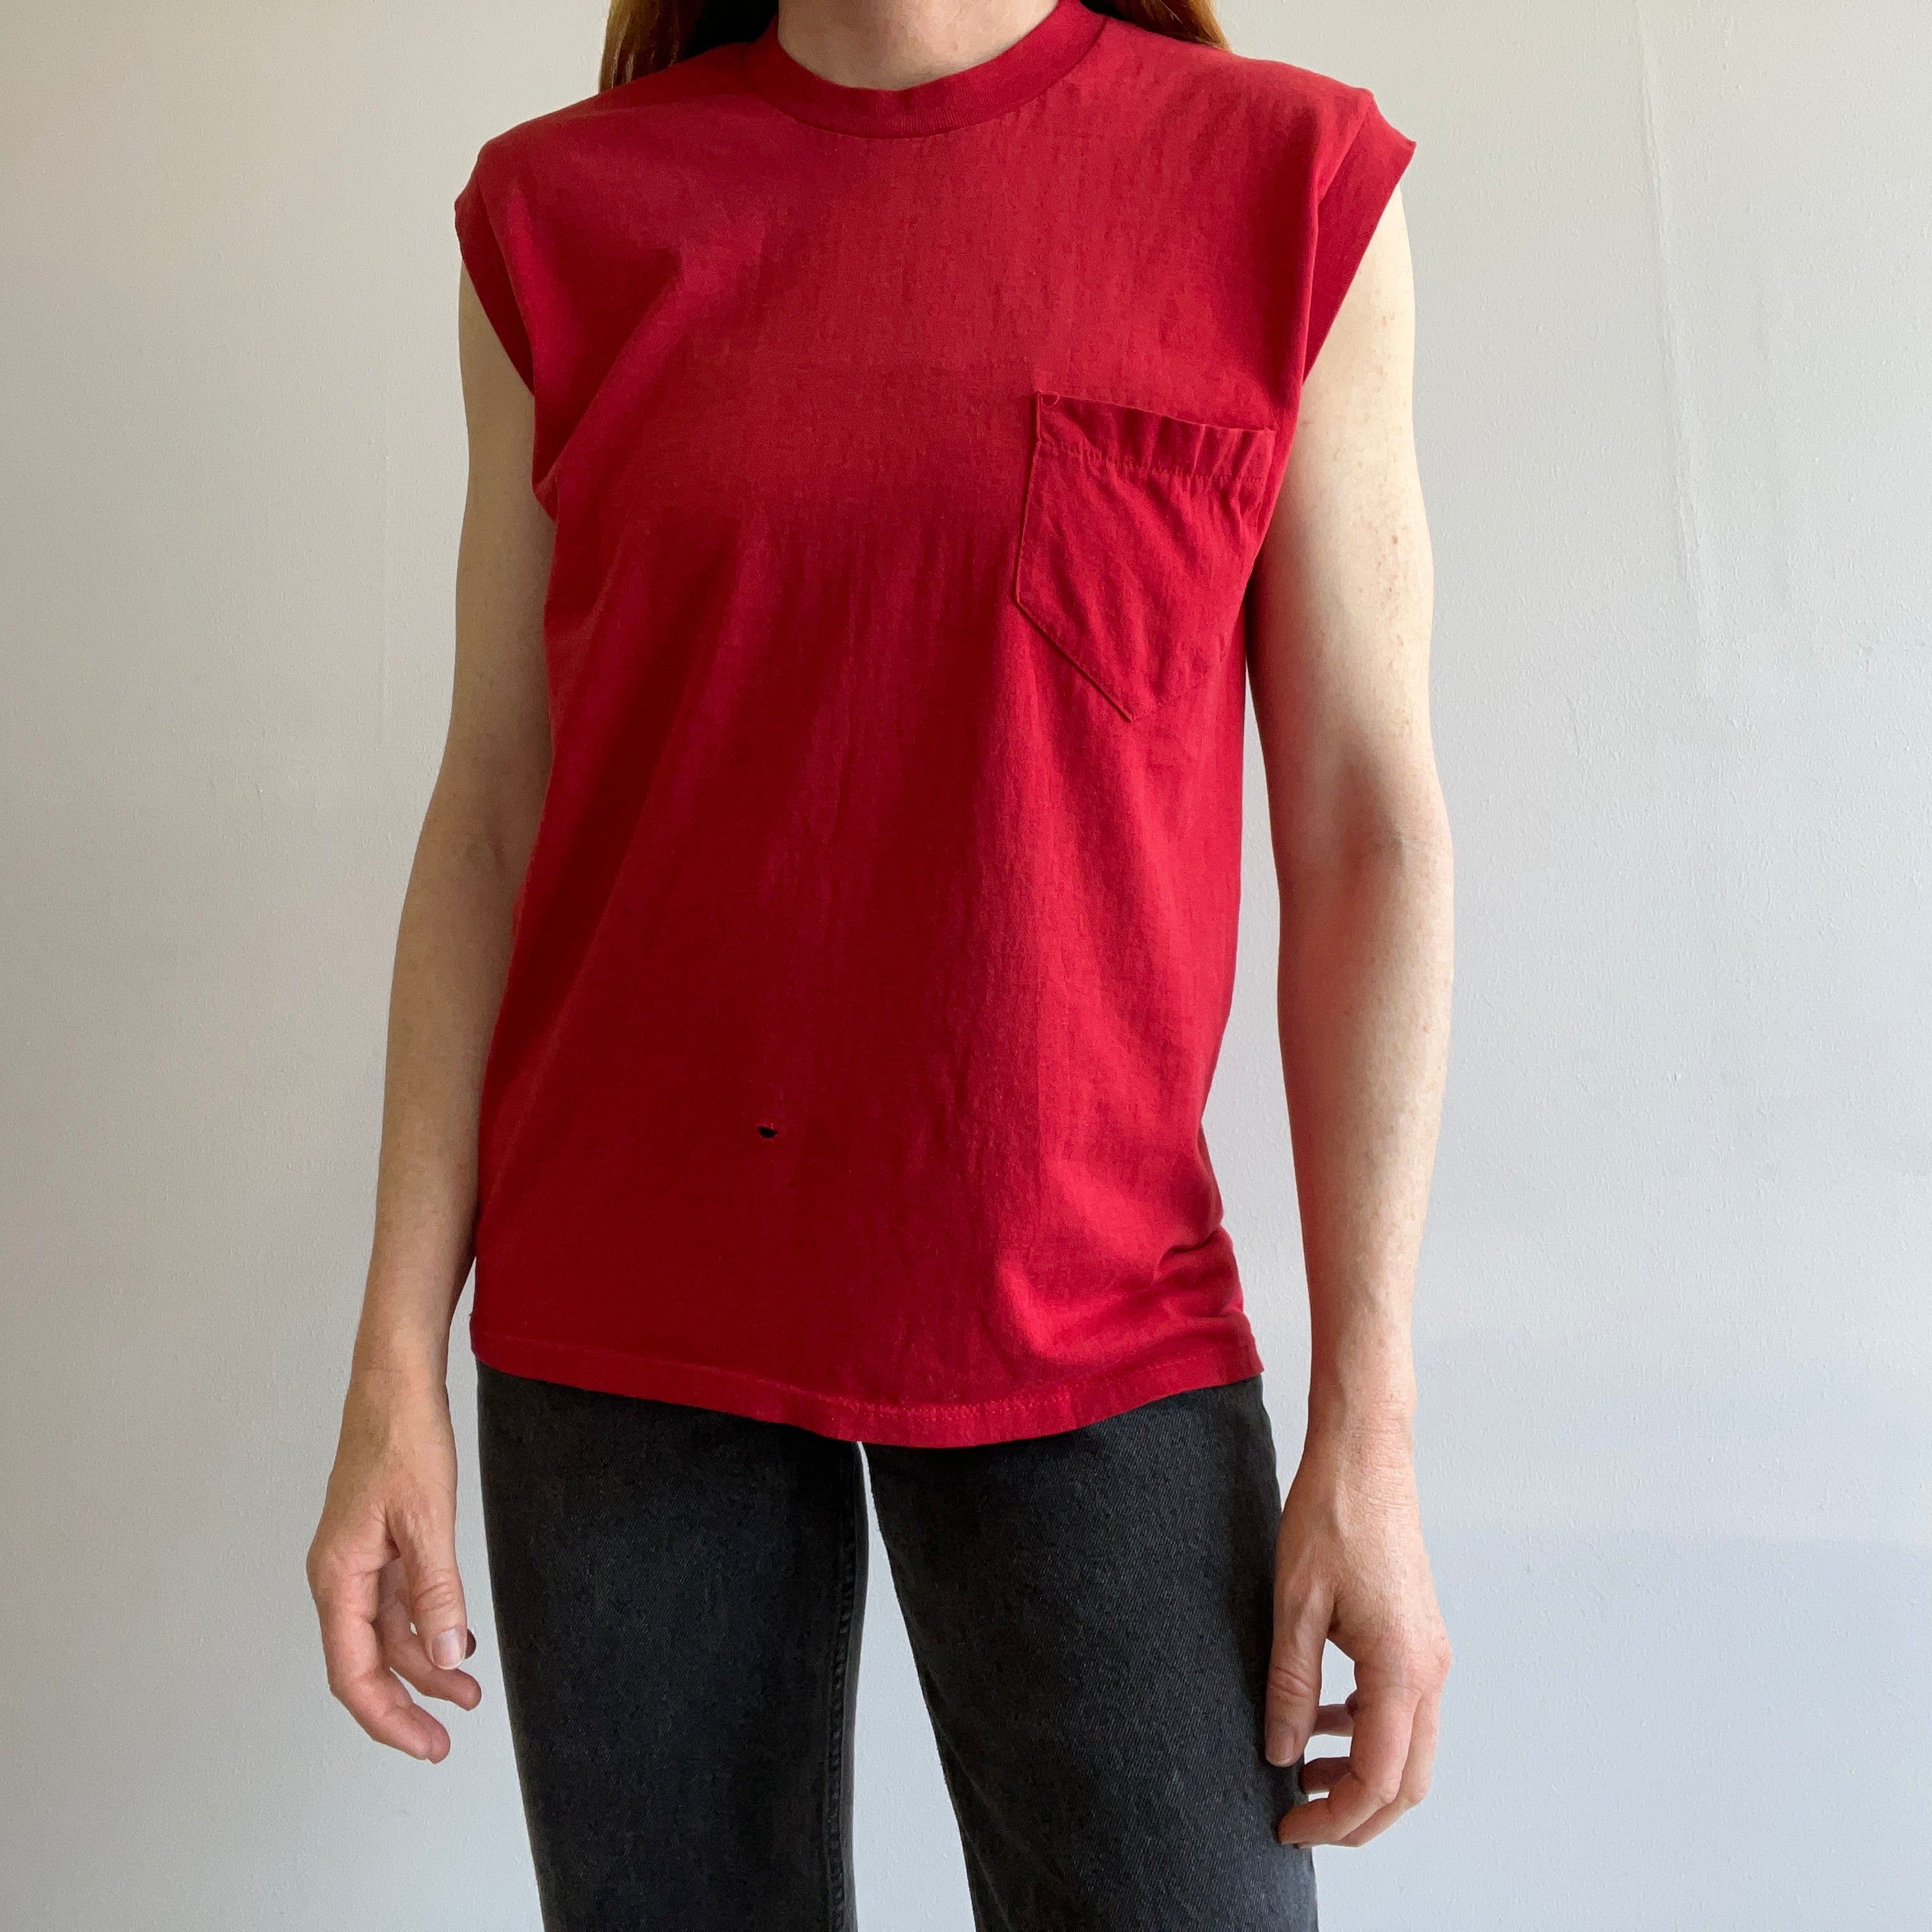 1970/80s Red Triangle Pocket Muscle Tank